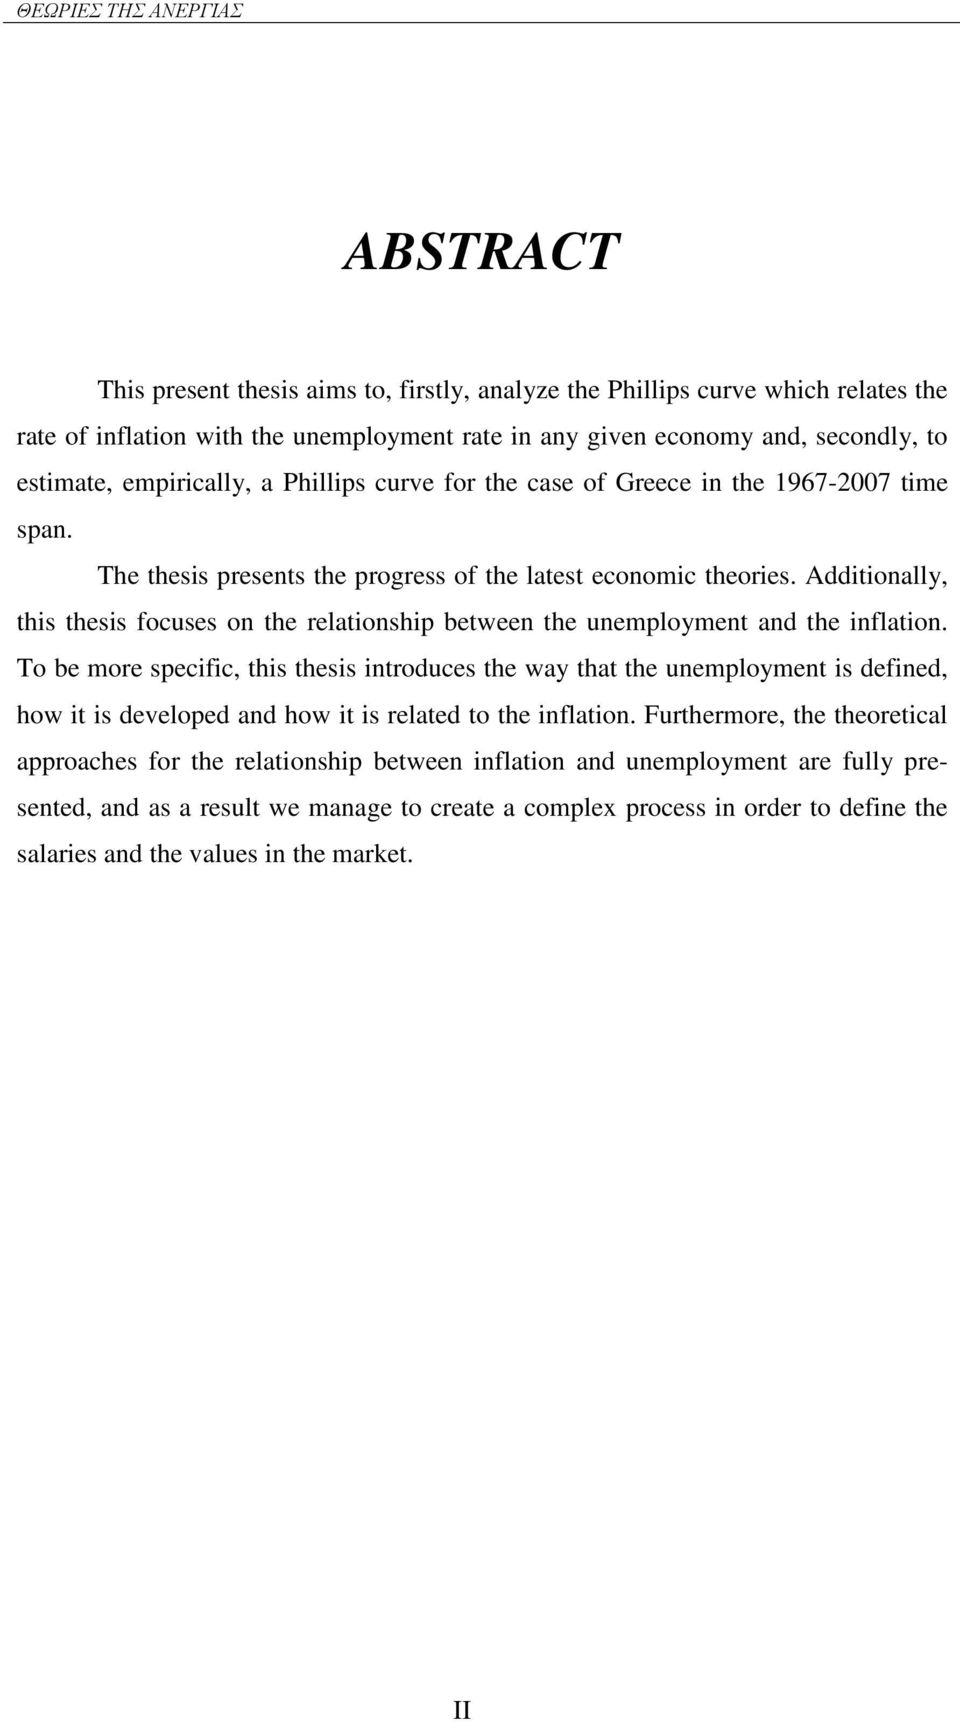 Additionally, this thesis focuses on the relationship between the unemployment and the inflation.